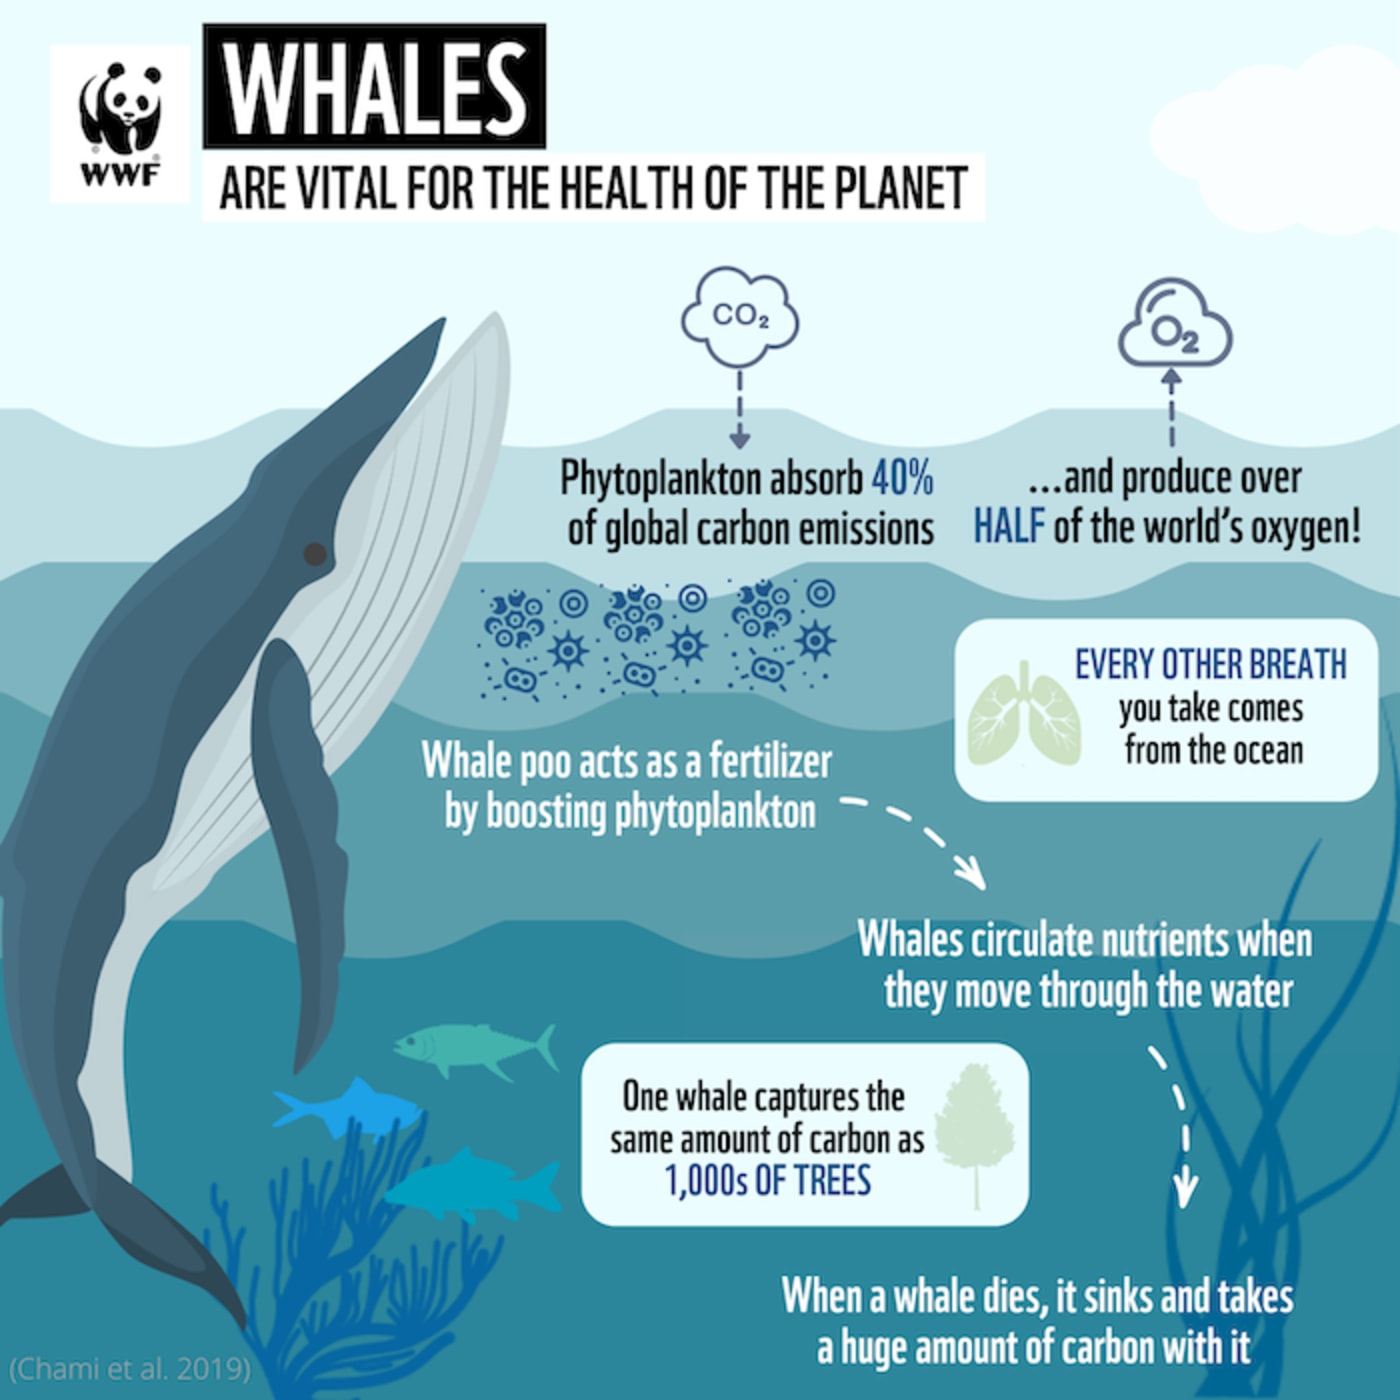 Whales are vital for the health of the planet.